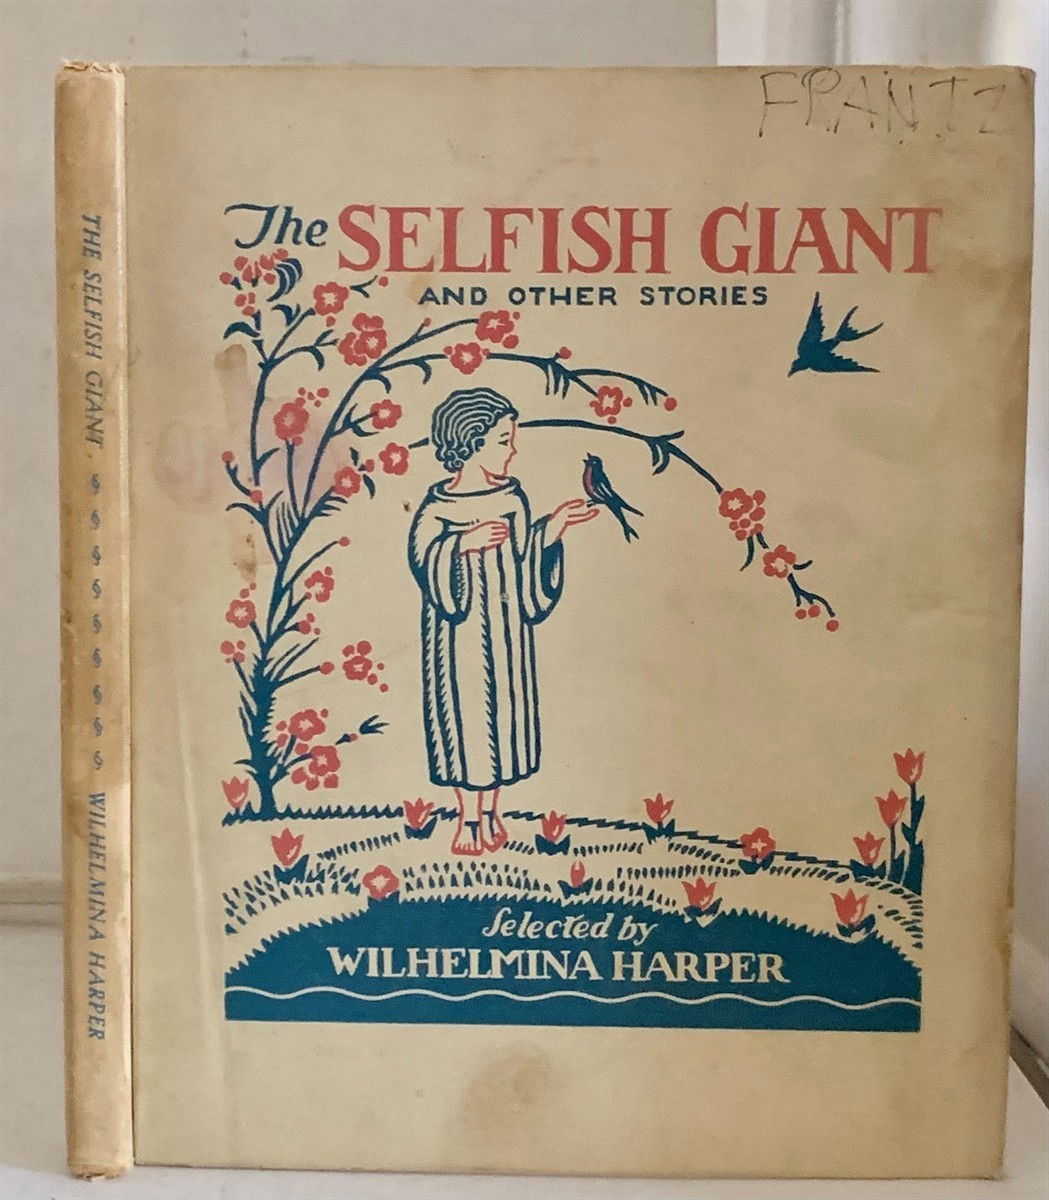  - The Selfish Giant and Other Stories